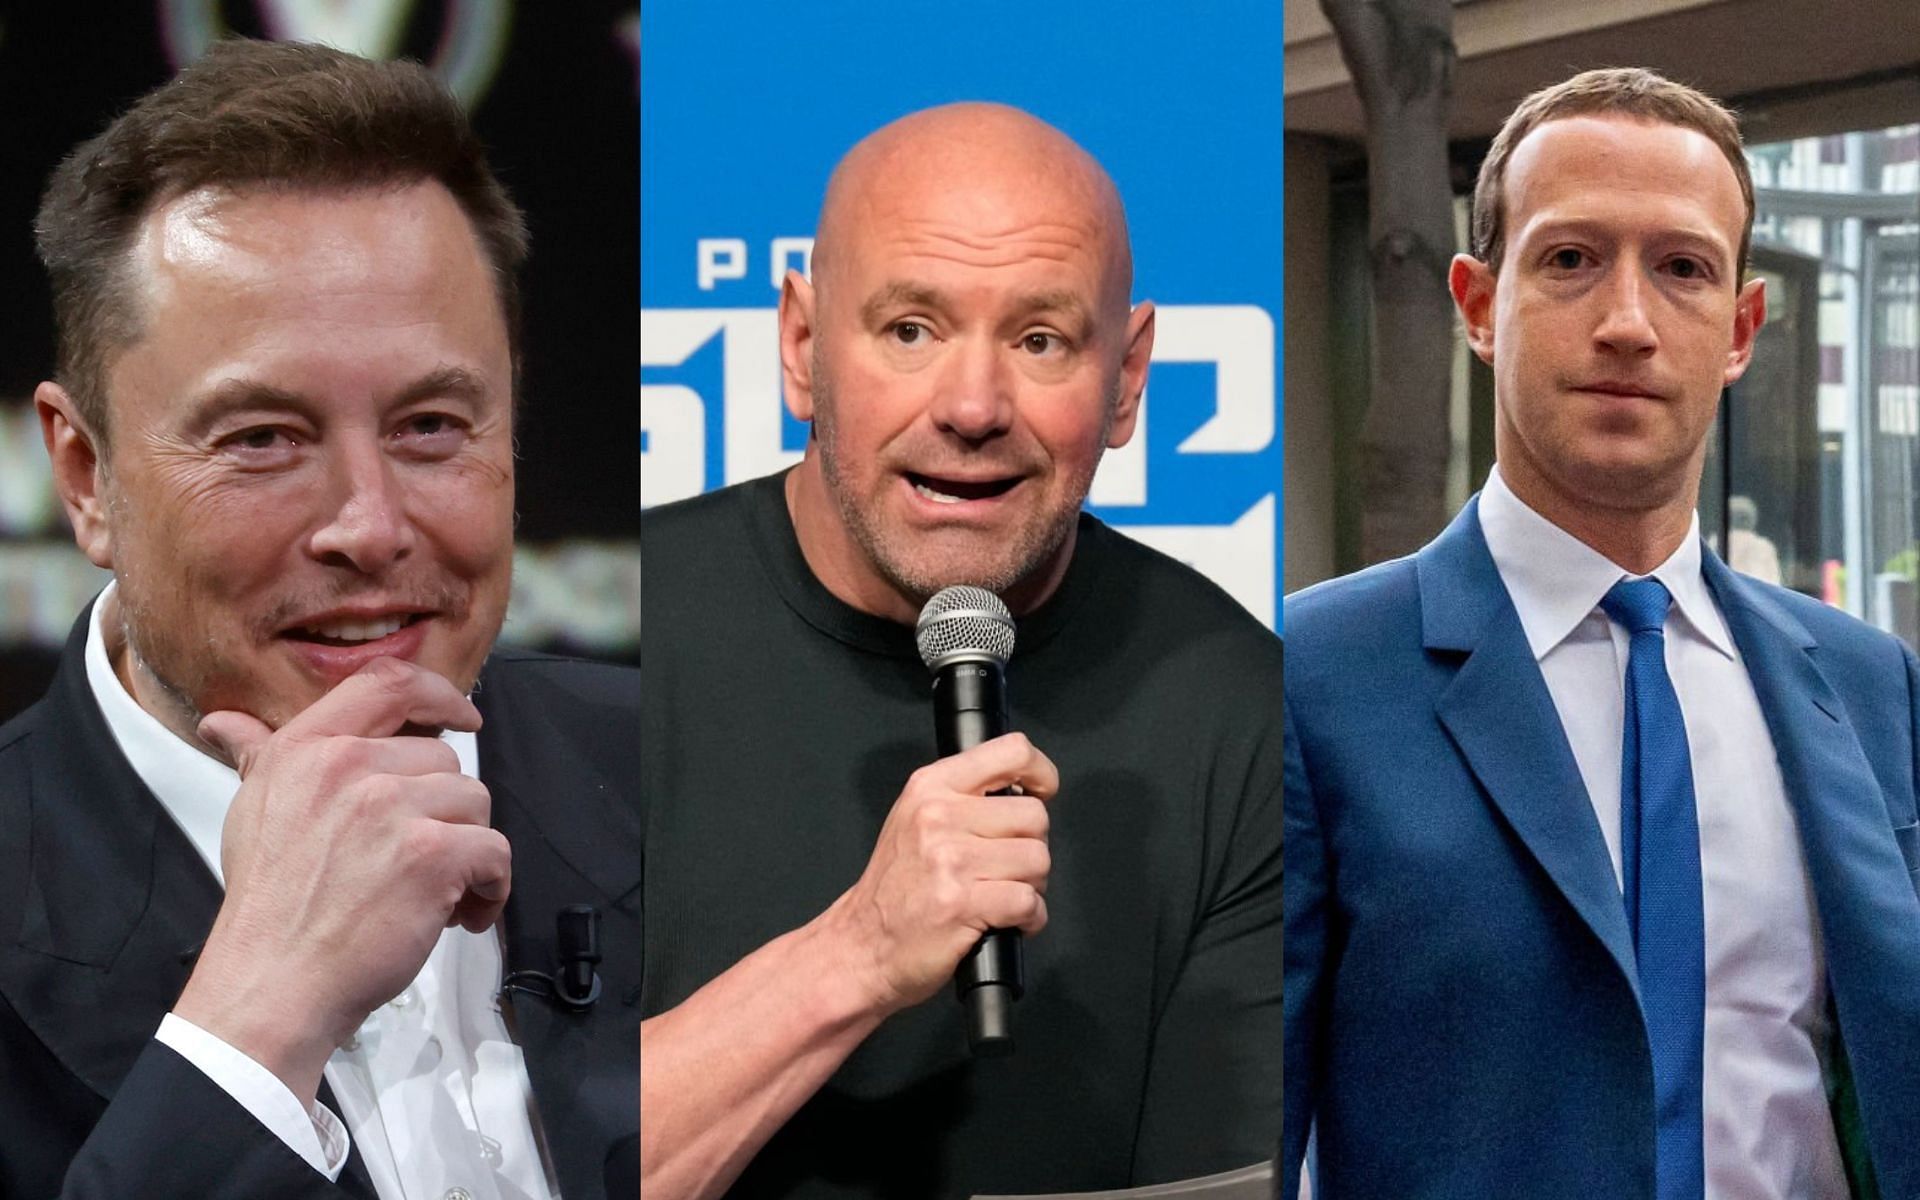 Dana White lists concerns ahead of potential MMA bout between Elon Musk and Mark Zuckerberg